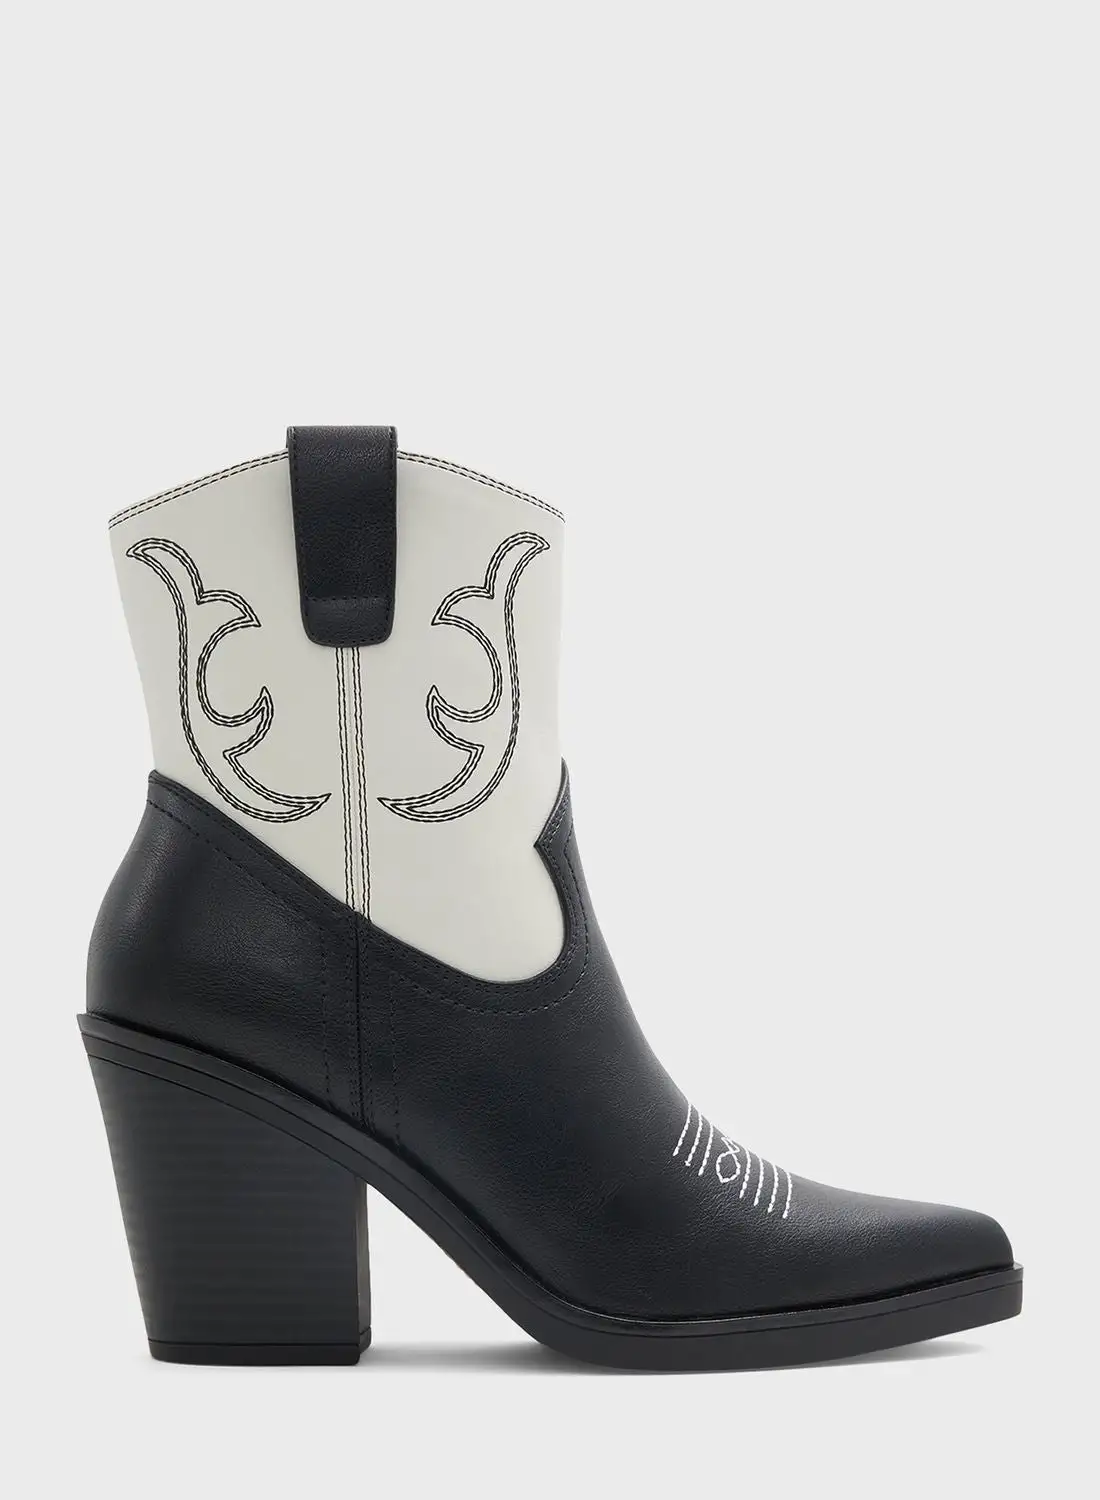 CALL IT SPRING Wildwest Ankle Boots